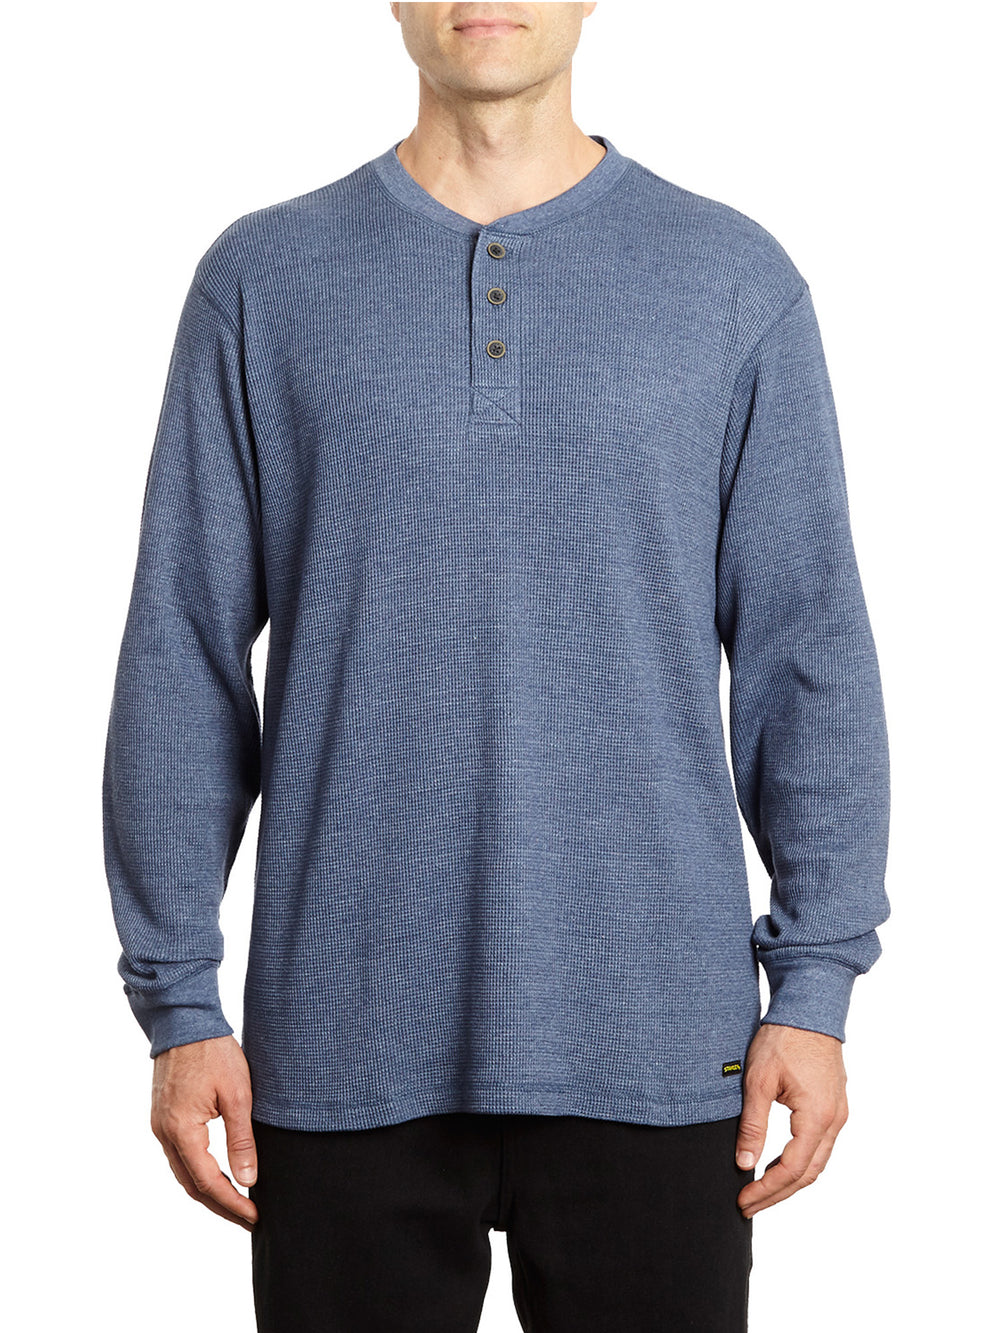 Thermal Henley Shirt with Long Sleeves